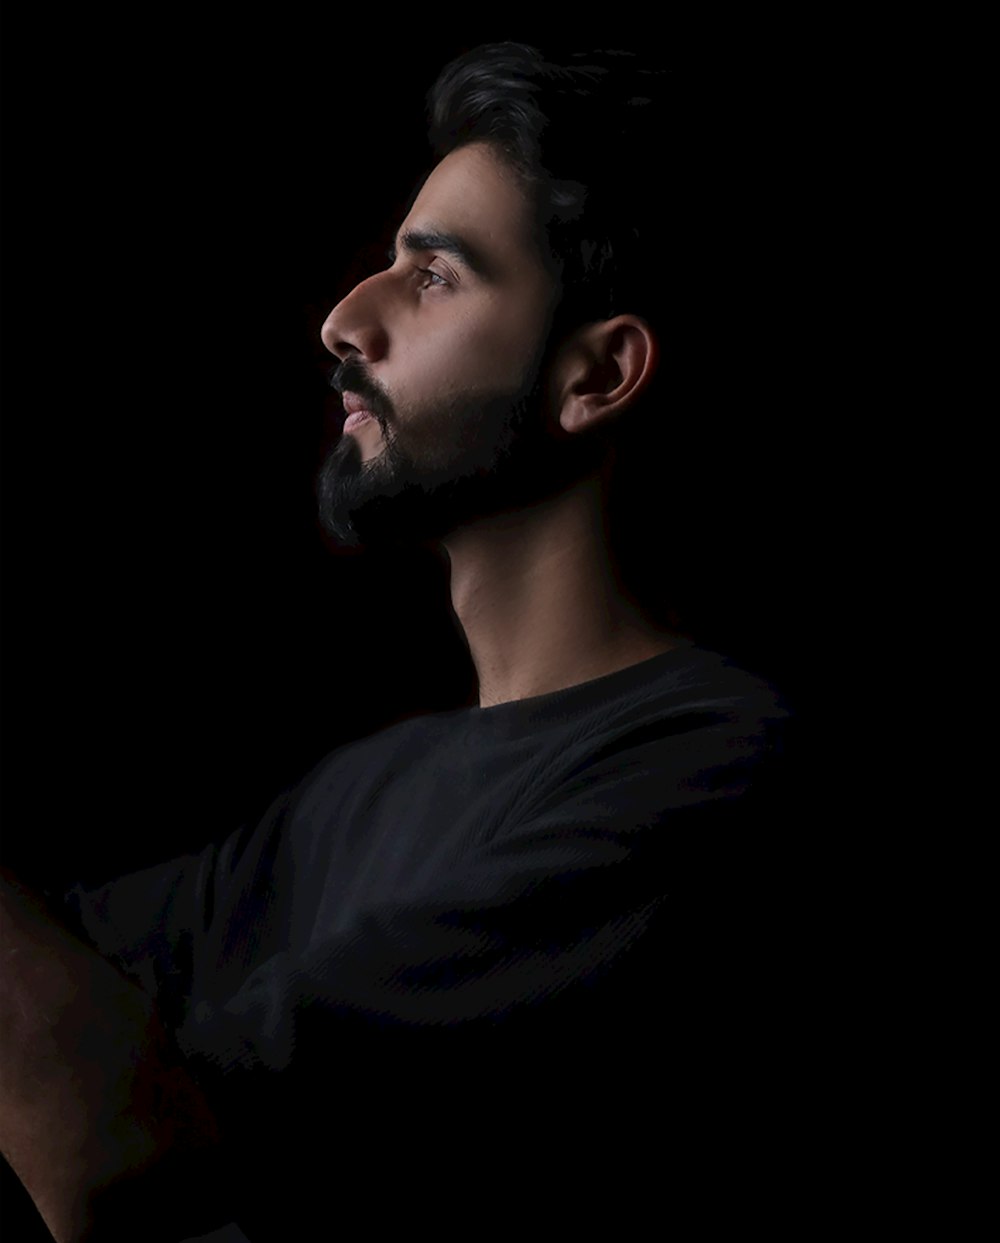 a man holding a cell phone in his hand